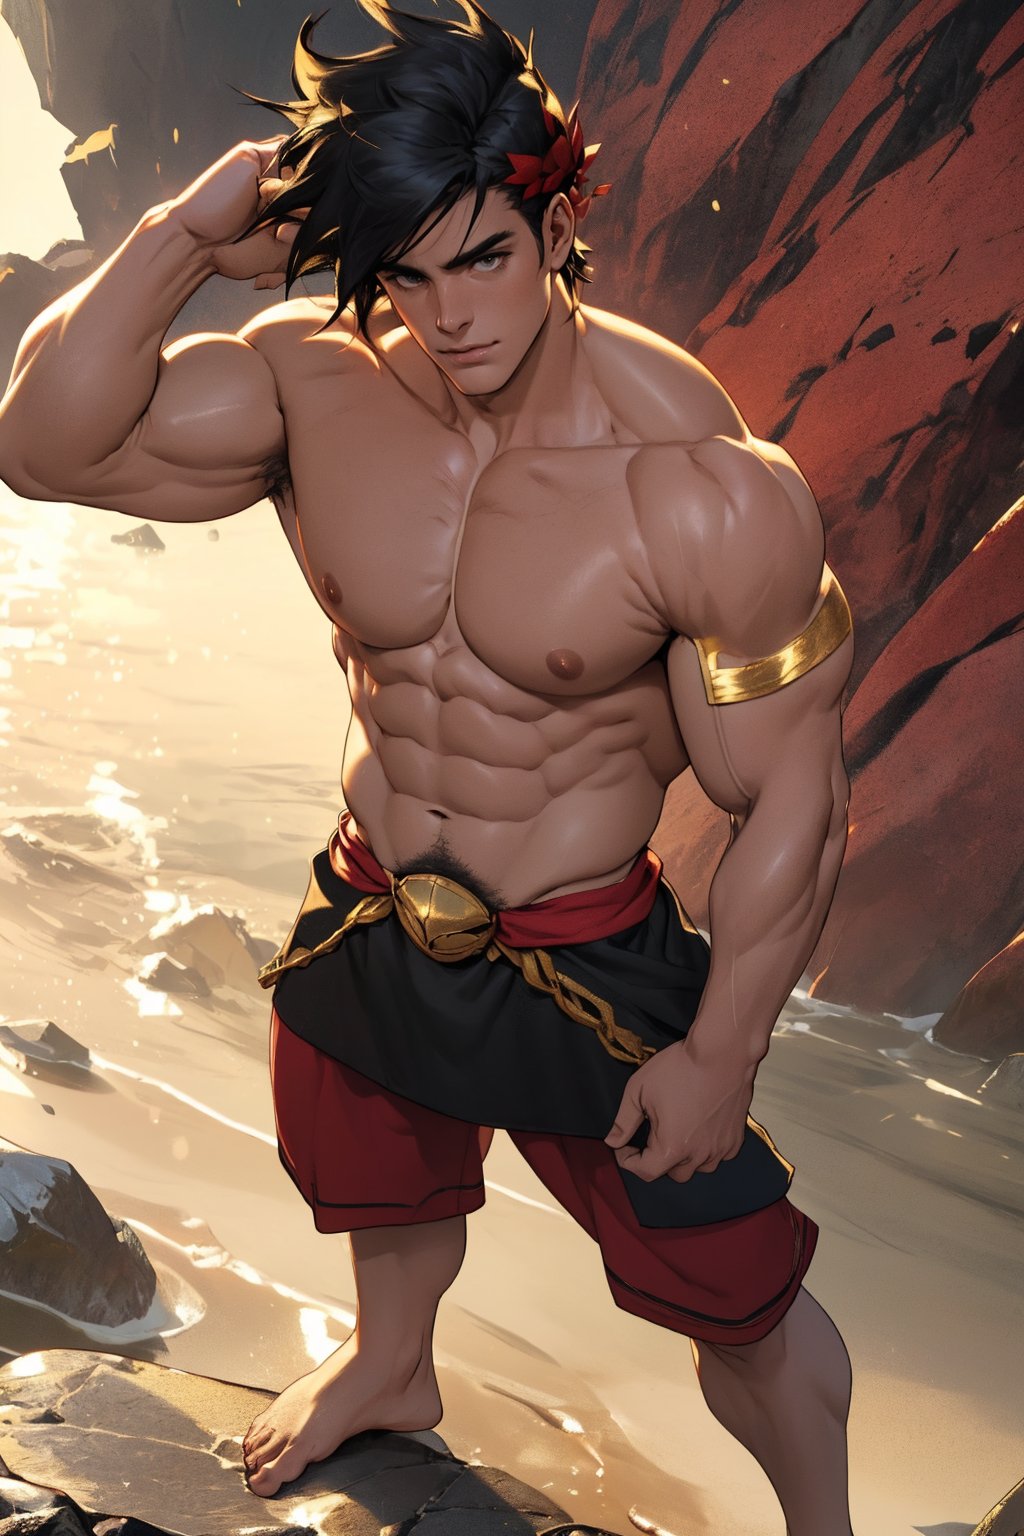 Close-up shot of Zagreus's chiseled physique, showcasing his broad chest, bulging biceps, and powerful shoulders, all exposed and gleaming in the warm golden light. The camera frames his muscular form against a neutral background, emphasizing the contours of his body as he stands confidently with his weight evenly distributed on both feet.